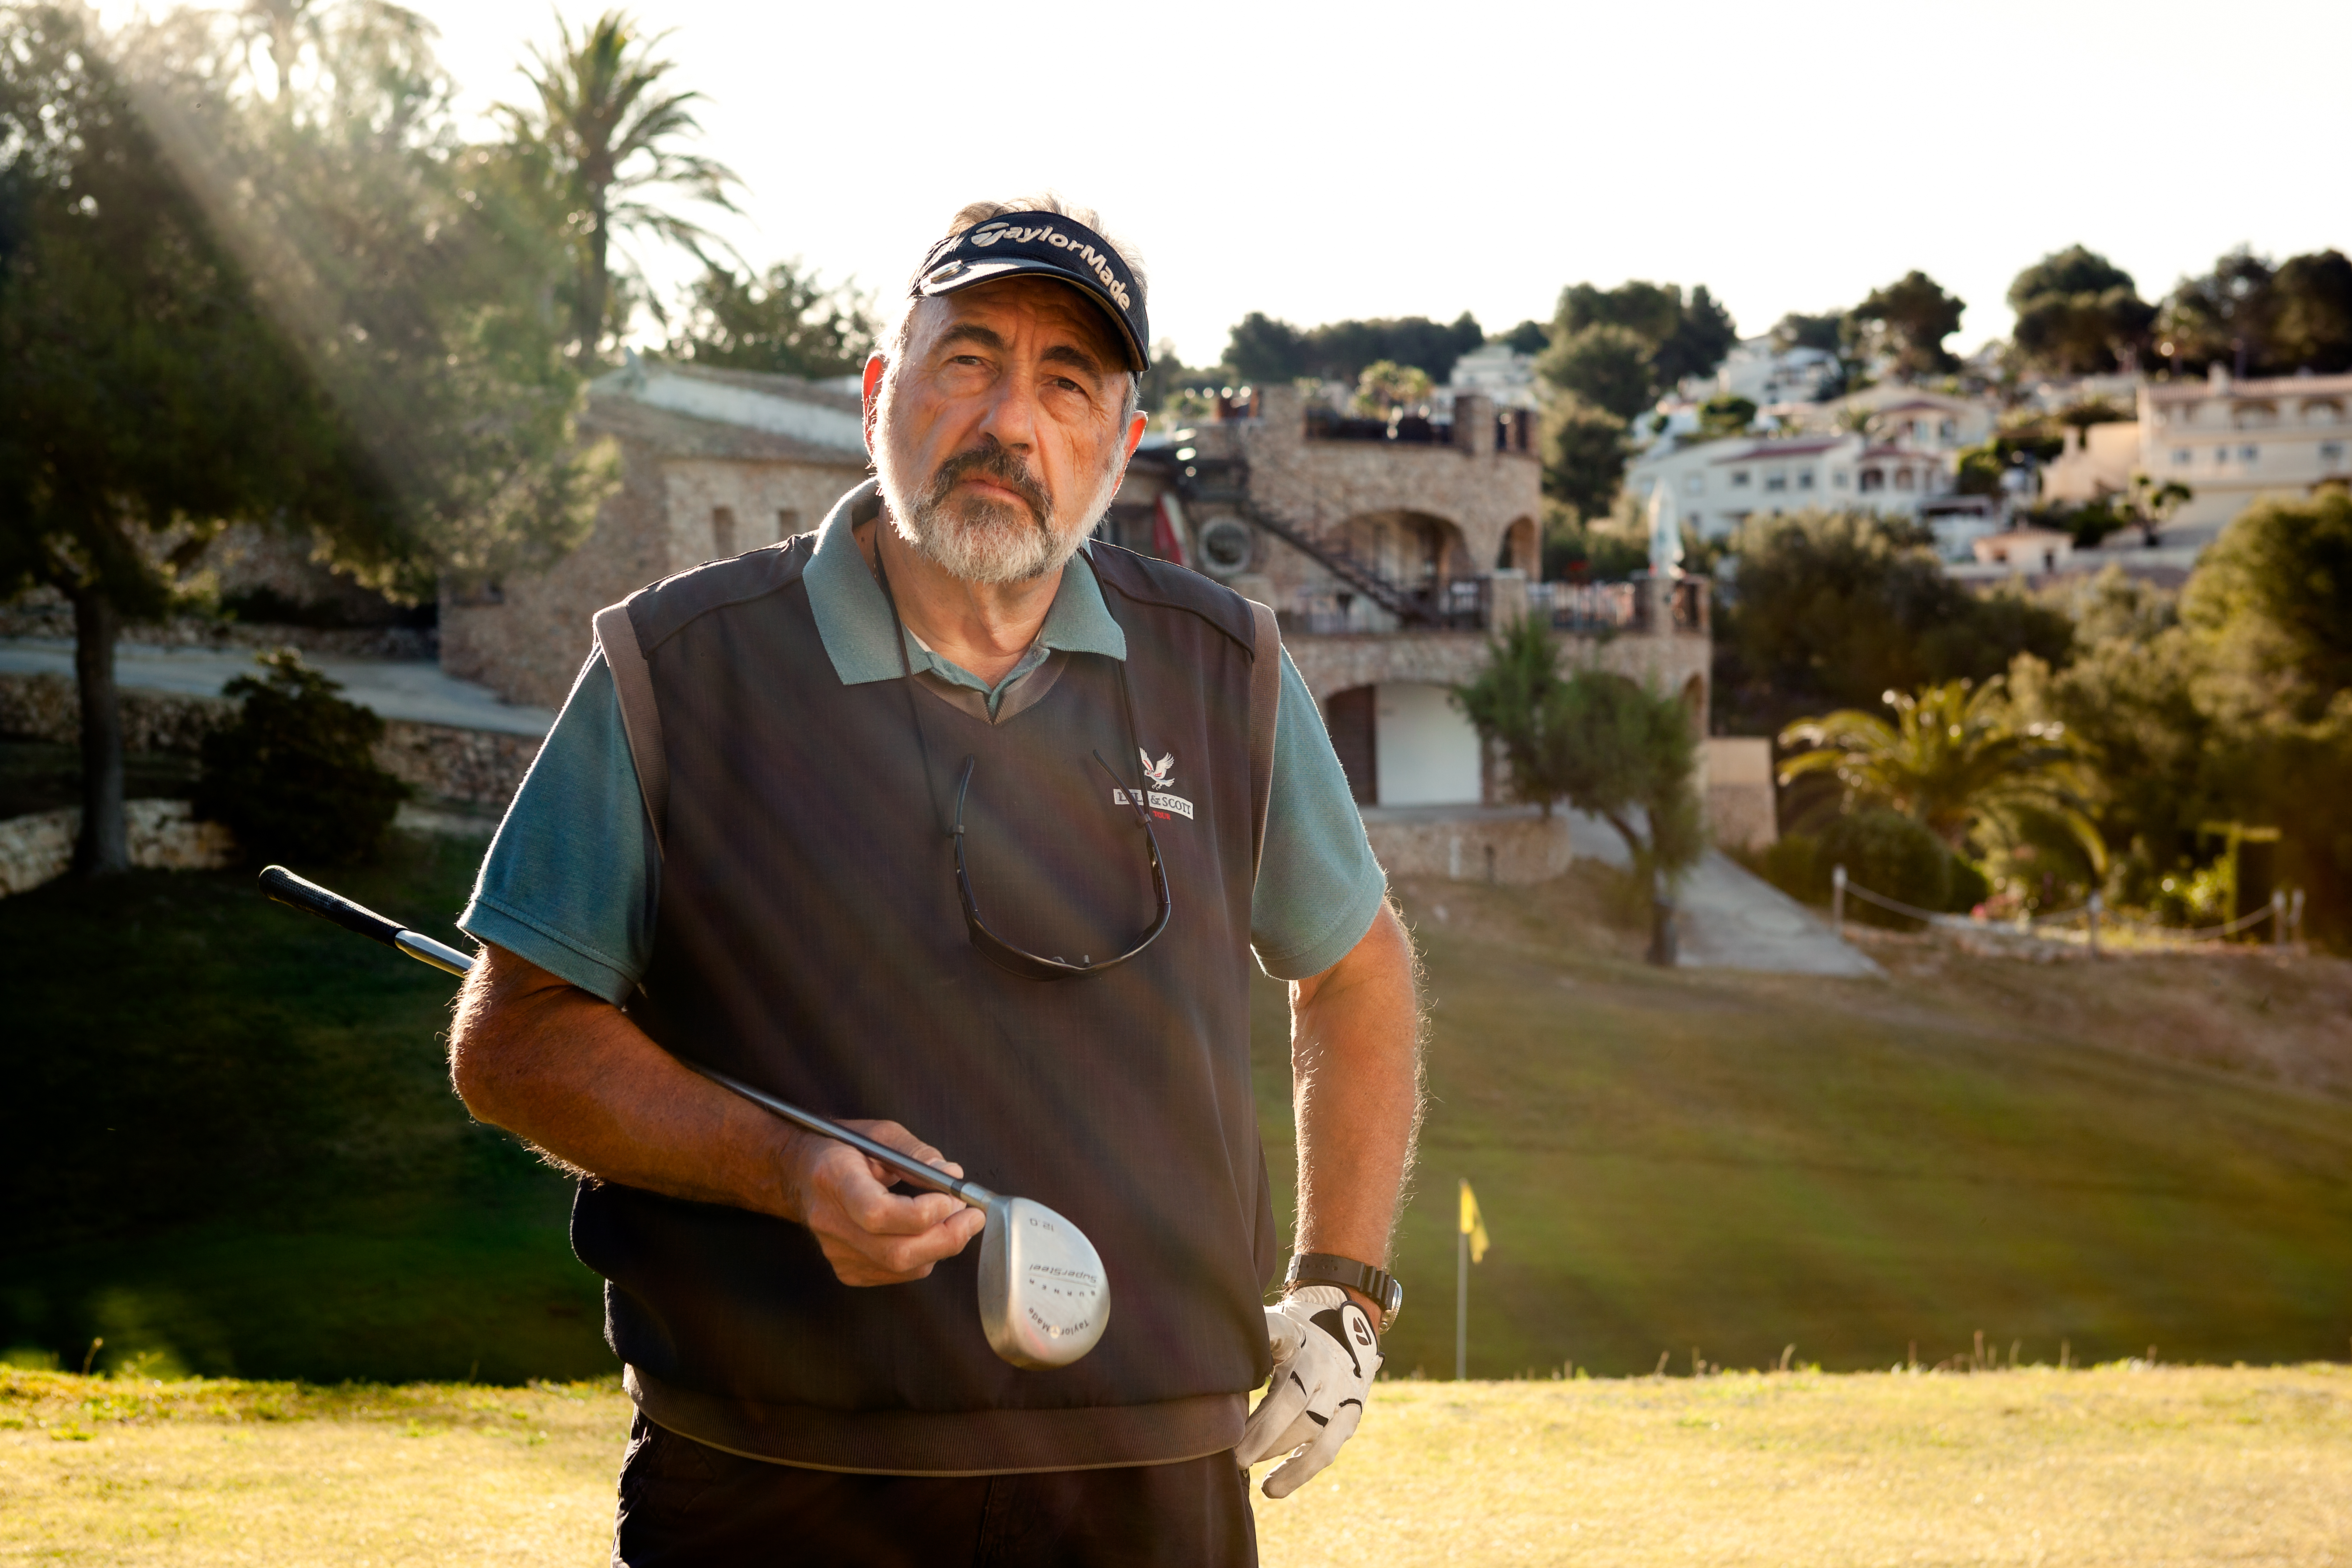 Image: David is a musician who retired to Spain with his wife. He enjoys living in a typical Spanish village and plays golf regularly with friends, many of whom are also expatriates.